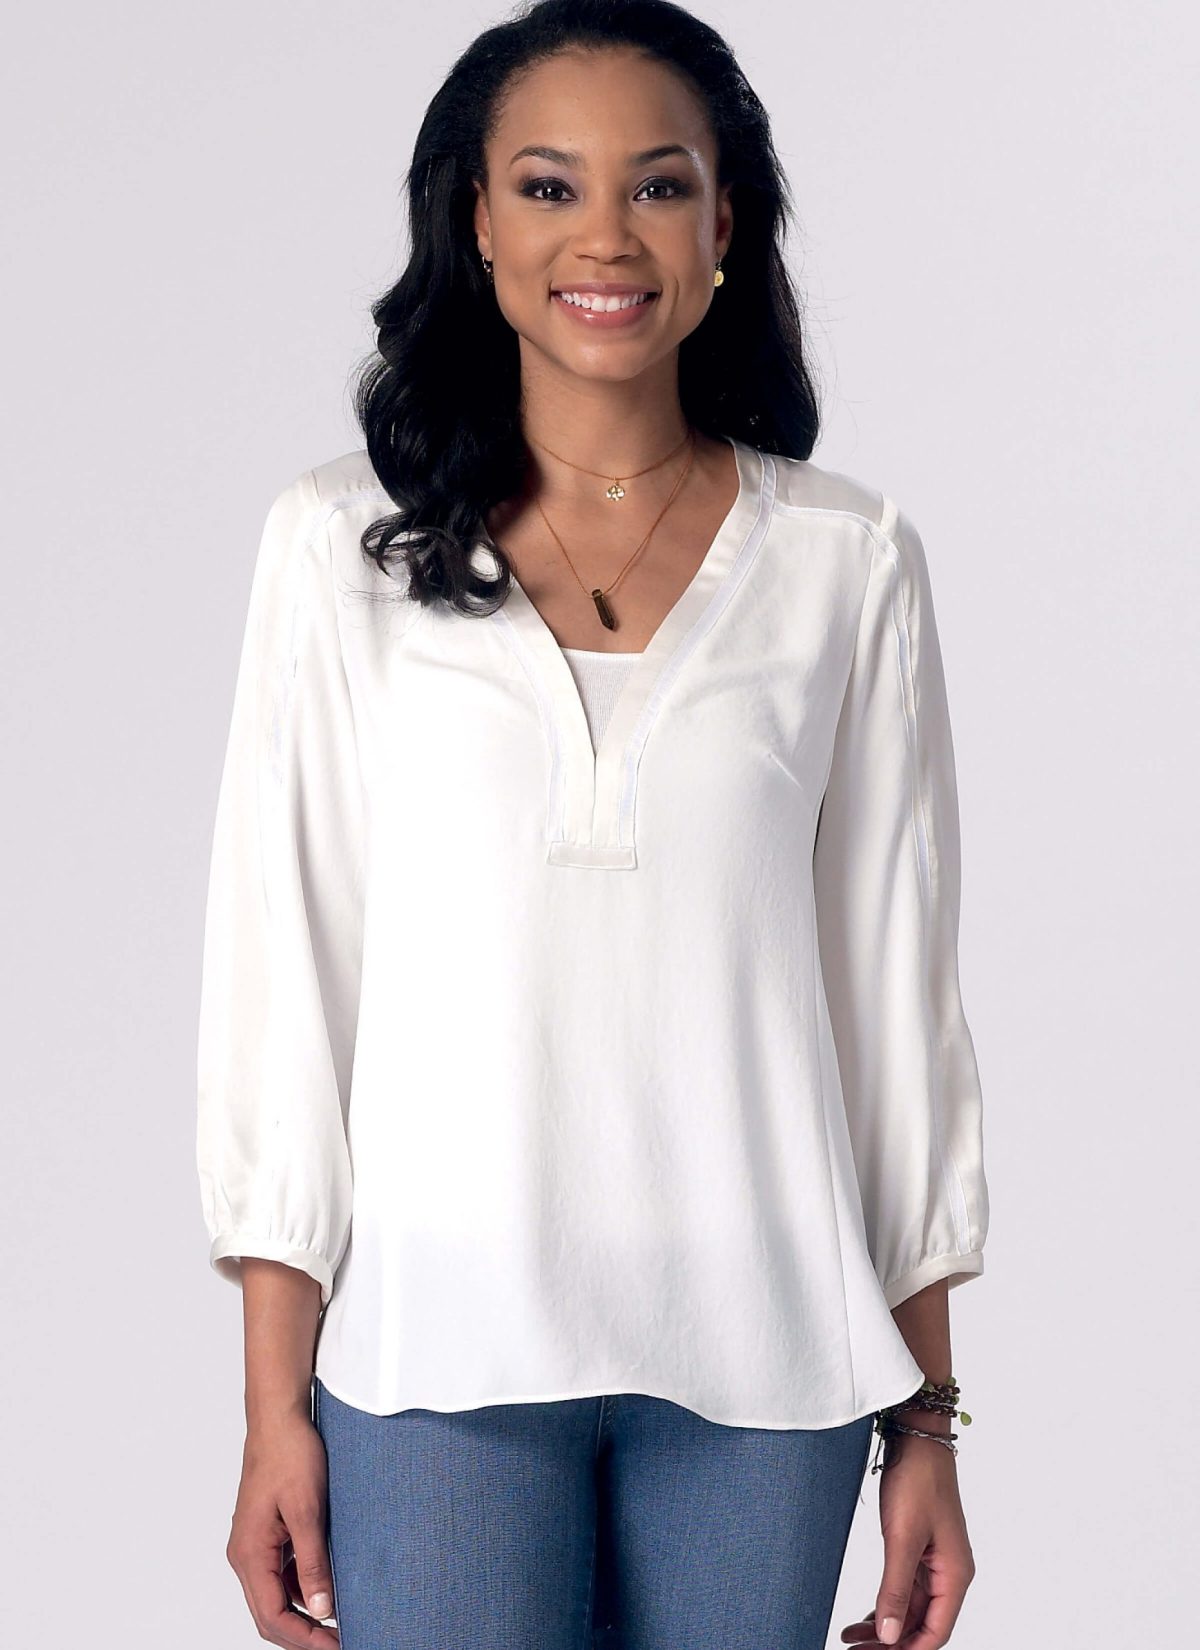 McCall's Sewing Pattern M7357 Misses' Banded Tops with Yoke